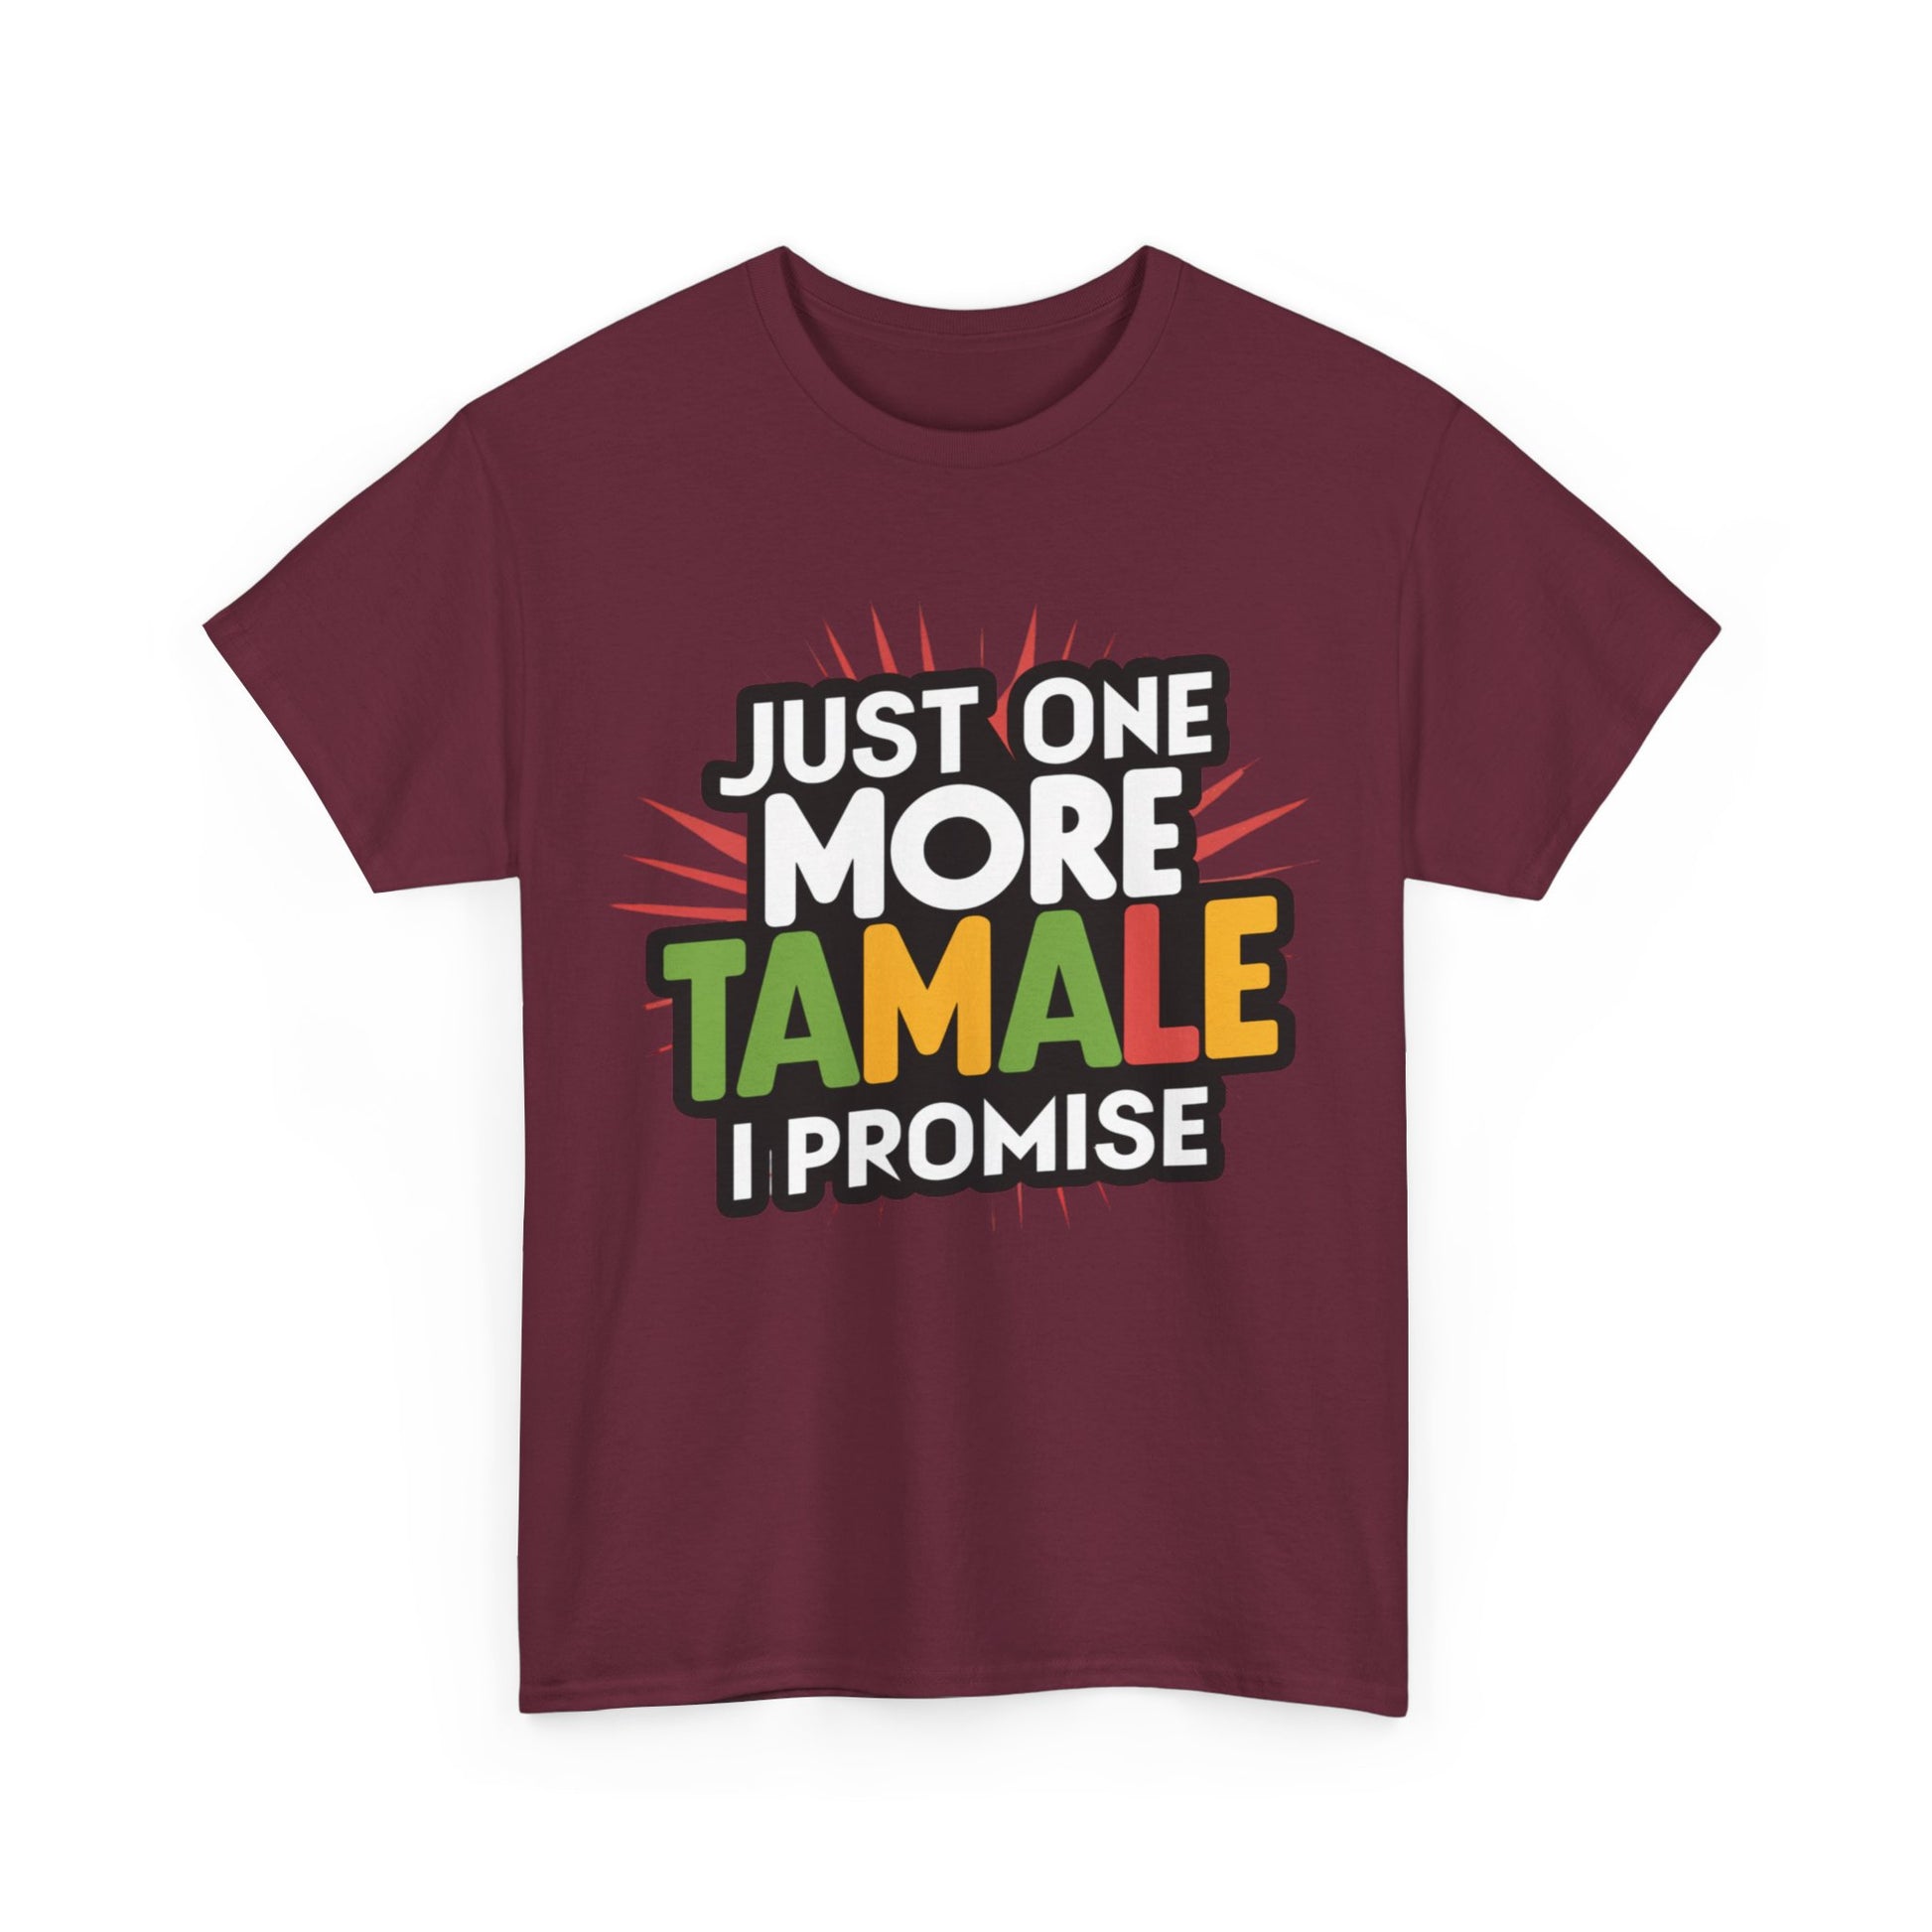 Just One More Tamale I Promise Mexican Food Graphic Unisex Heavy Cotton Tee Cotton Funny Humorous Graphic Soft Premium Unisex Men Women Maroon T-shirt Birthday Gift-27